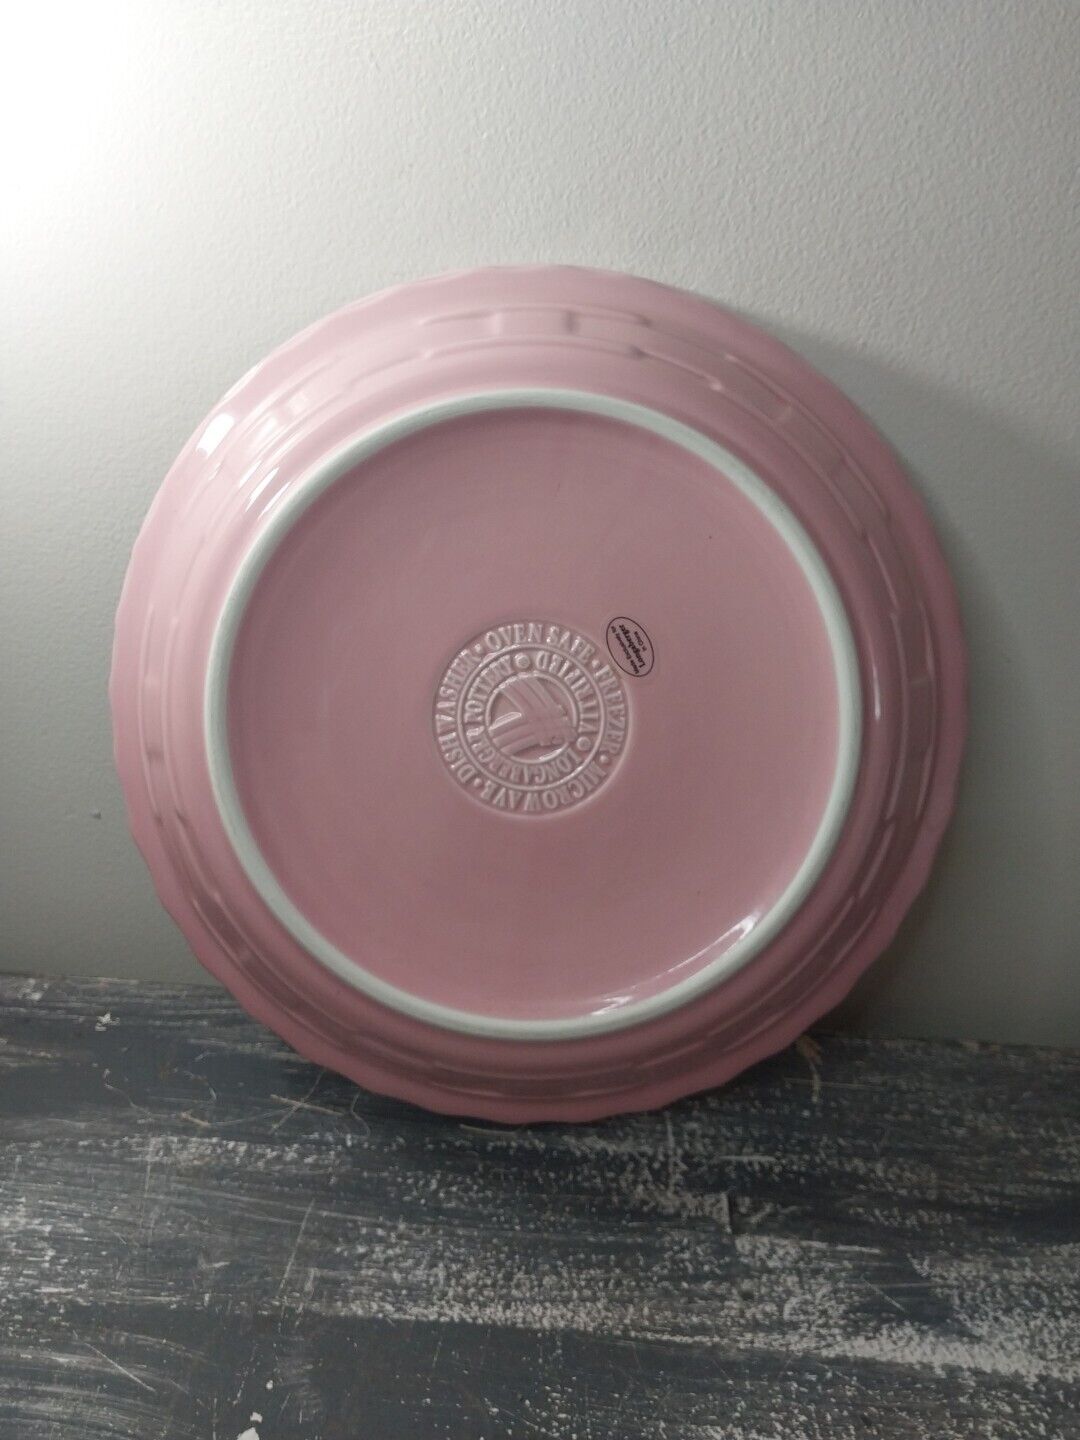 Longaberger Pottery Woven Traditions PINK Pie Plate EXCELLENT